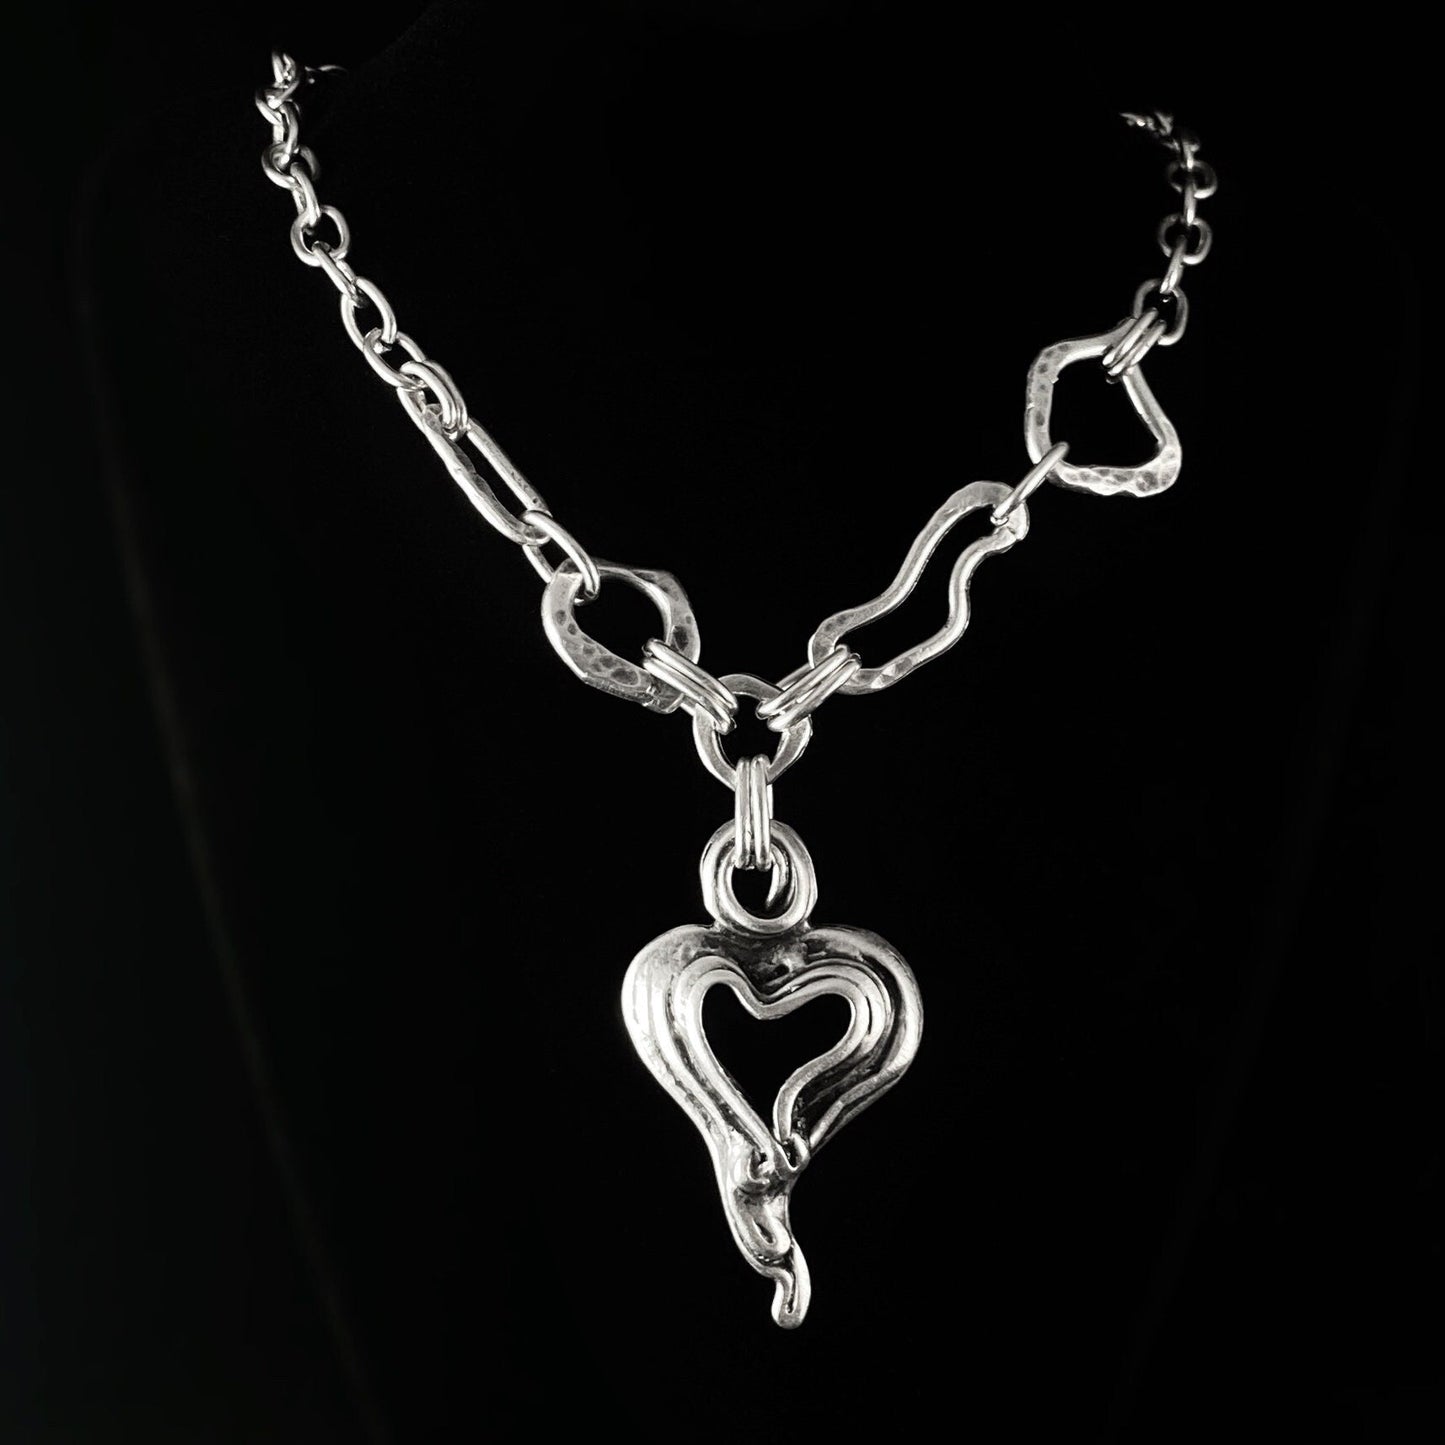 Silver Chain Link Abstract Necklace With Heart Pendant, Handmade, Nickel Free-Noir